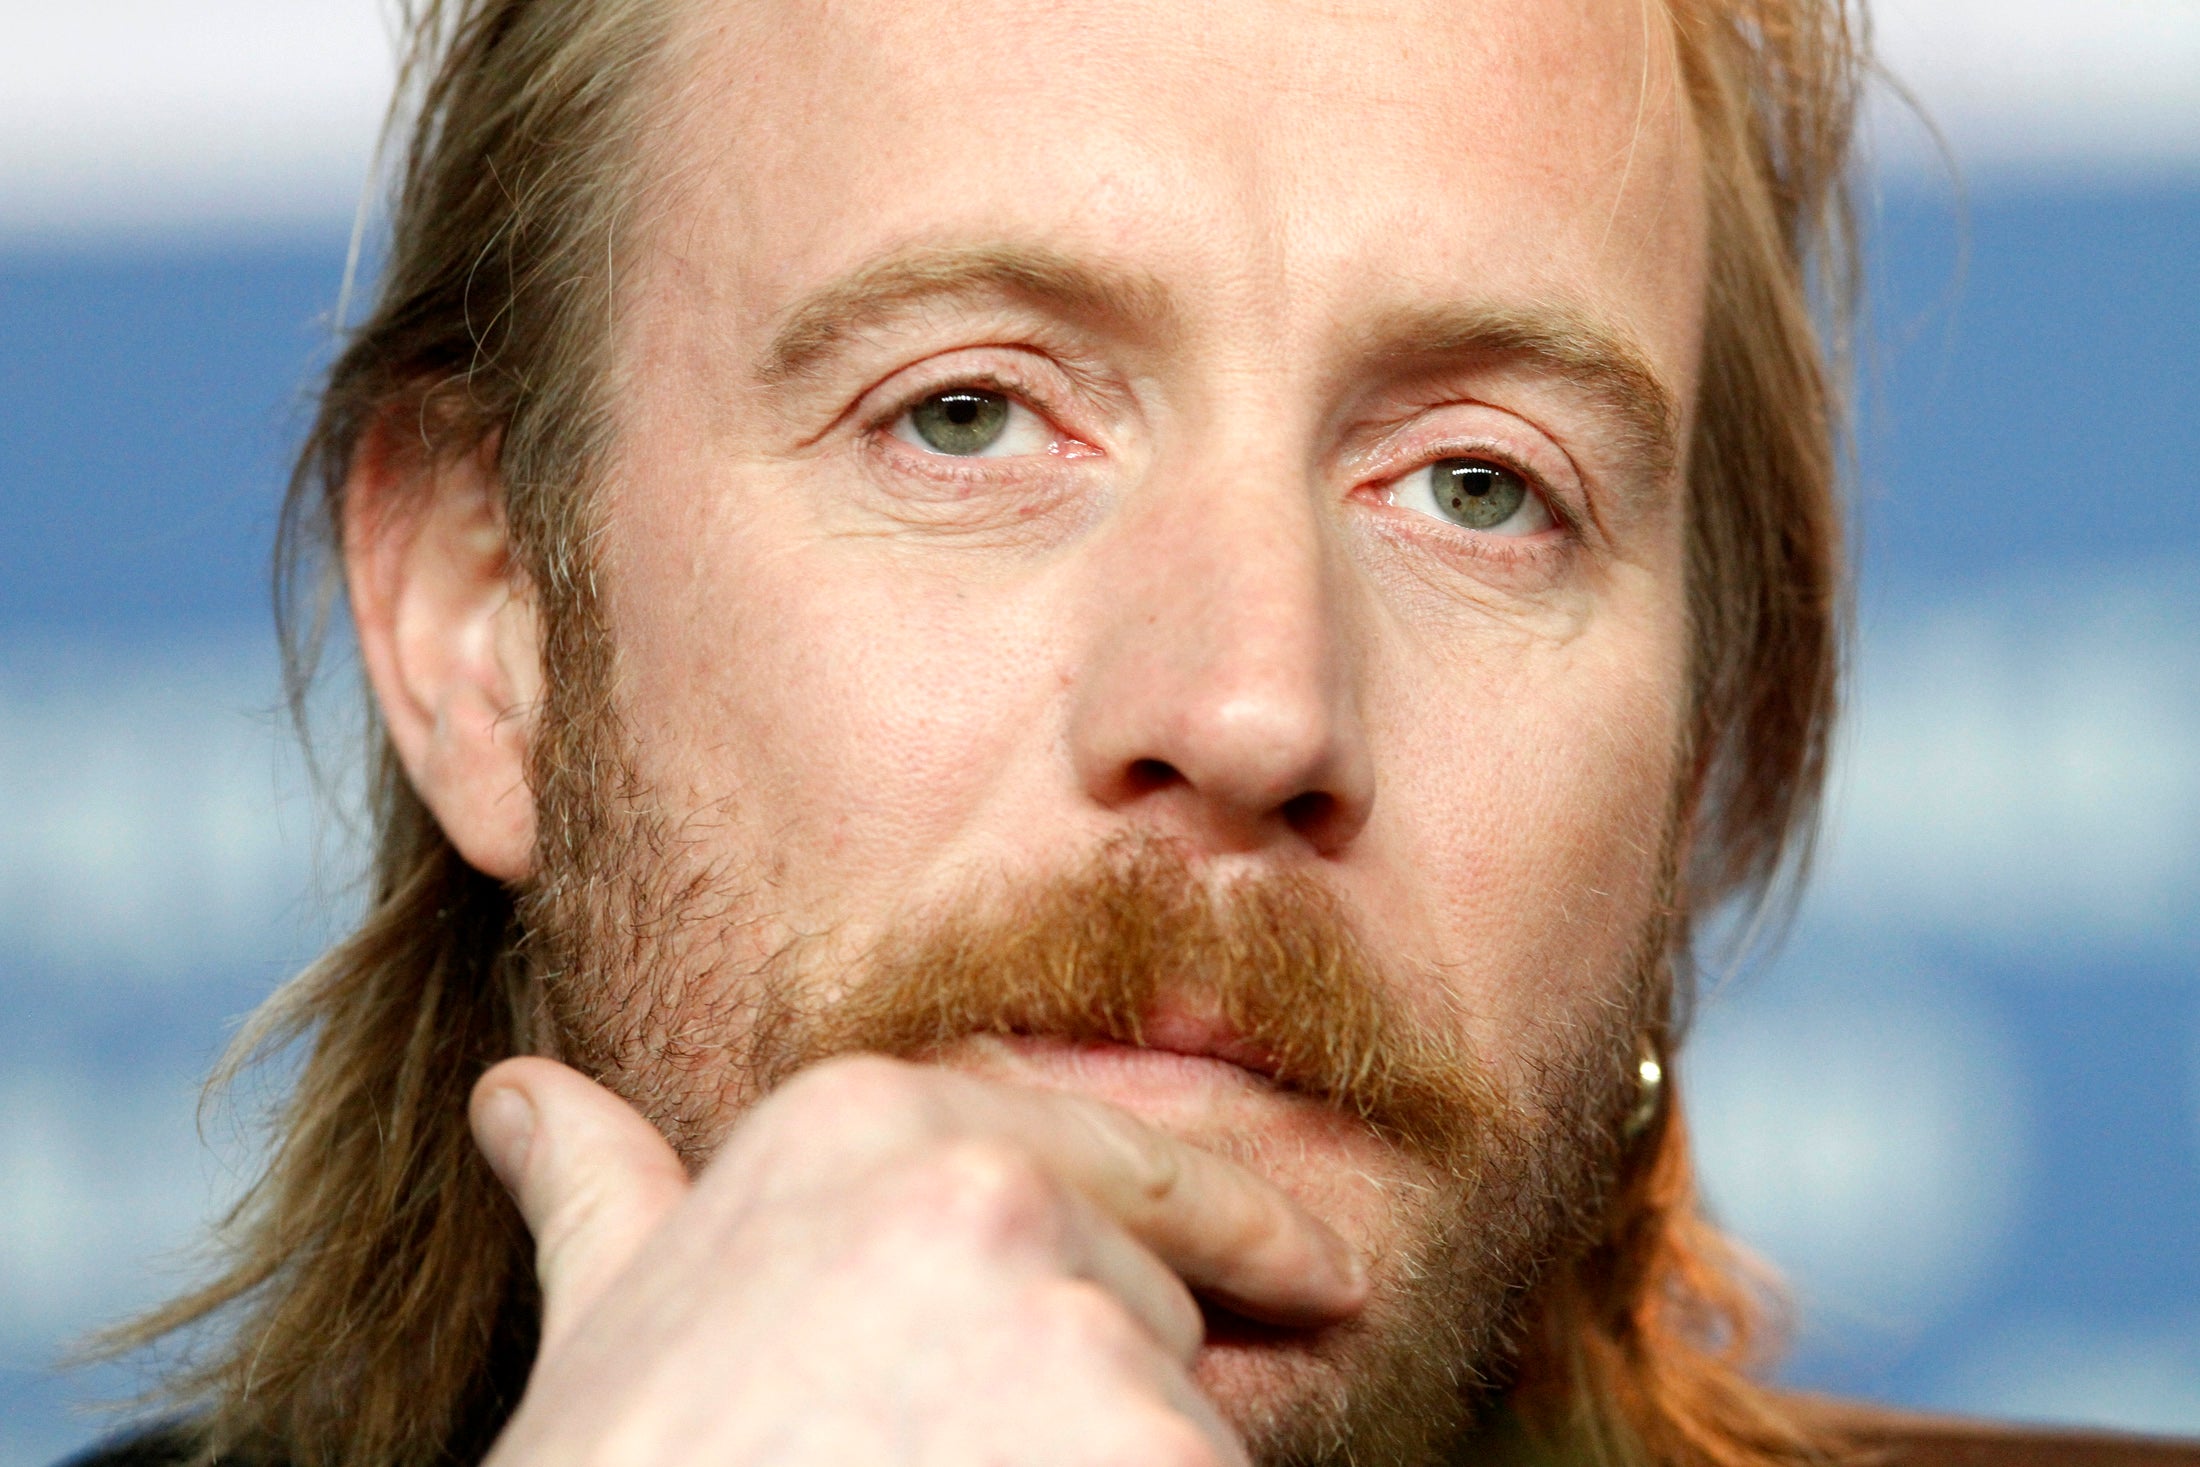 Rhys Ifans has been awarded damages in his phone hacking lawsuit against News Group Newspapers